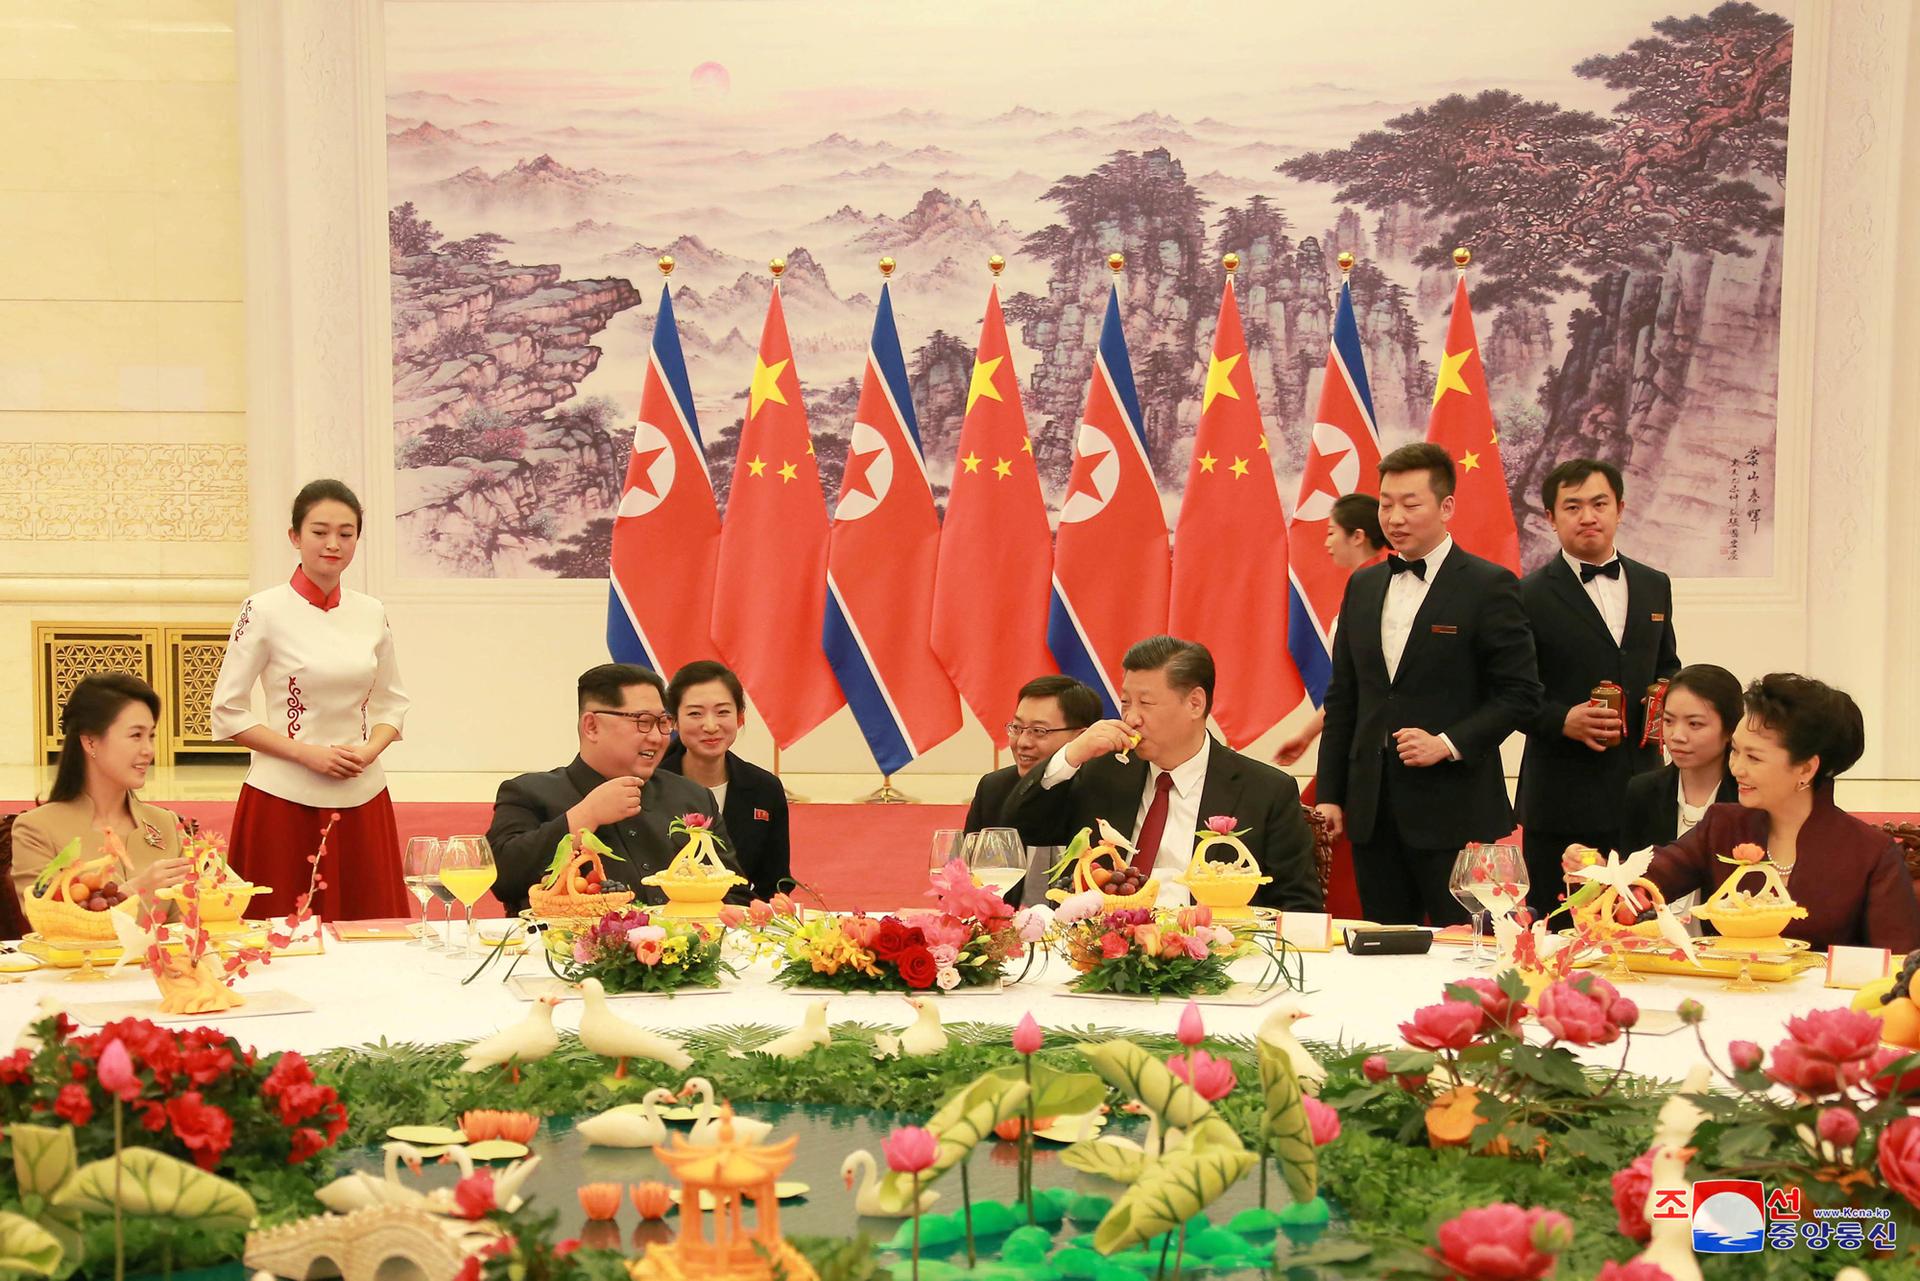 North Korean leader Kim Jong-un and wife Ri Sol Ju, and Chinese President Xi Jinping and wife Peng Liyuan sit at a large round table for dinner and toast each other.